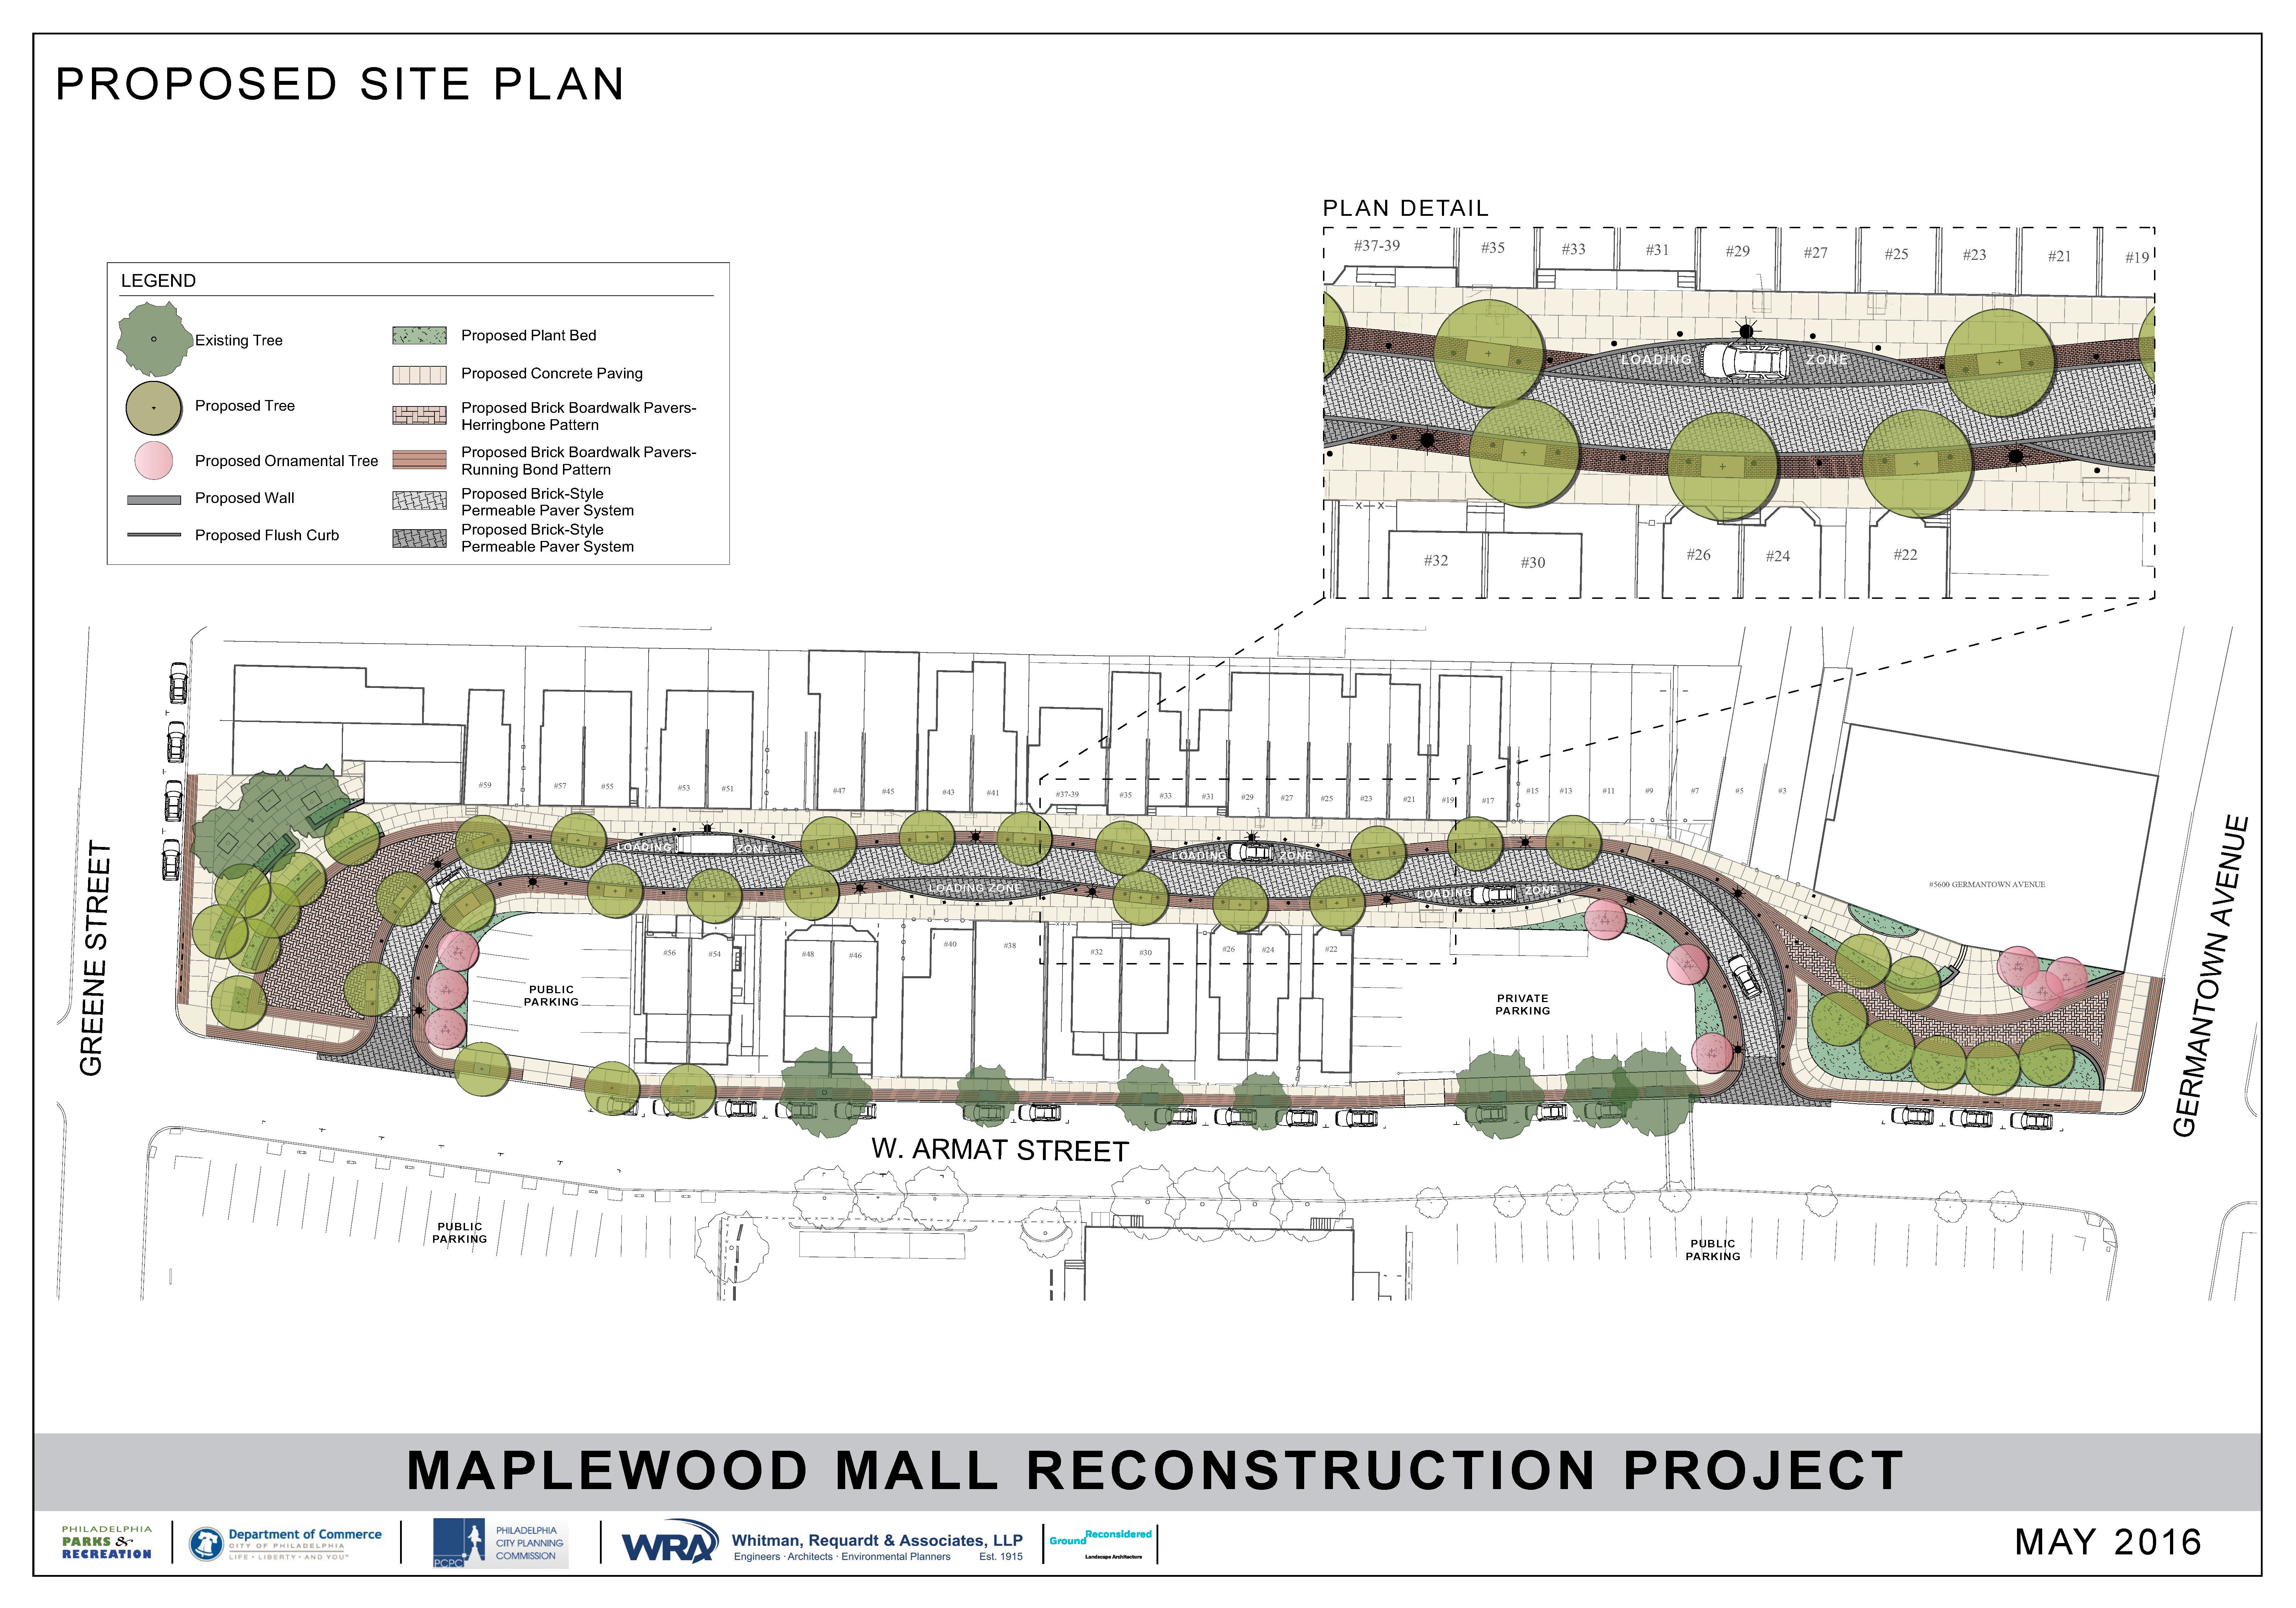 Maplewood Mall proposed reconstruction plan | WRA and Ground Reconsidered